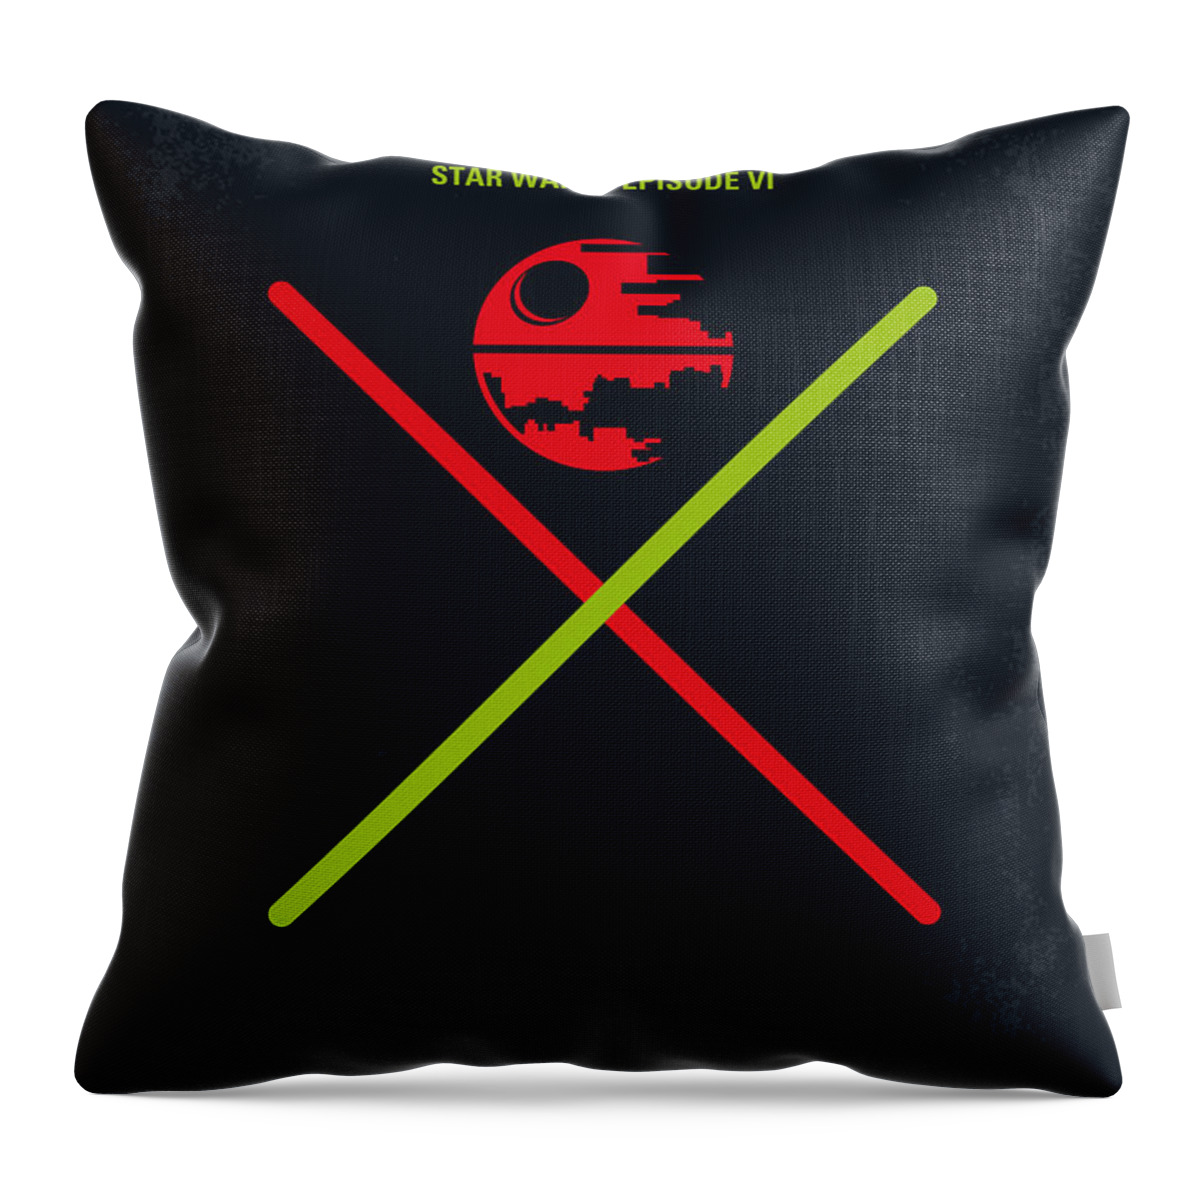 Star Wars Episode Vi Return Of The Jedi Throw Pillow featuring the digital art No156 My STAR WARS Episode VI Return of the Jedi minimal movie poster by Chungkong Art